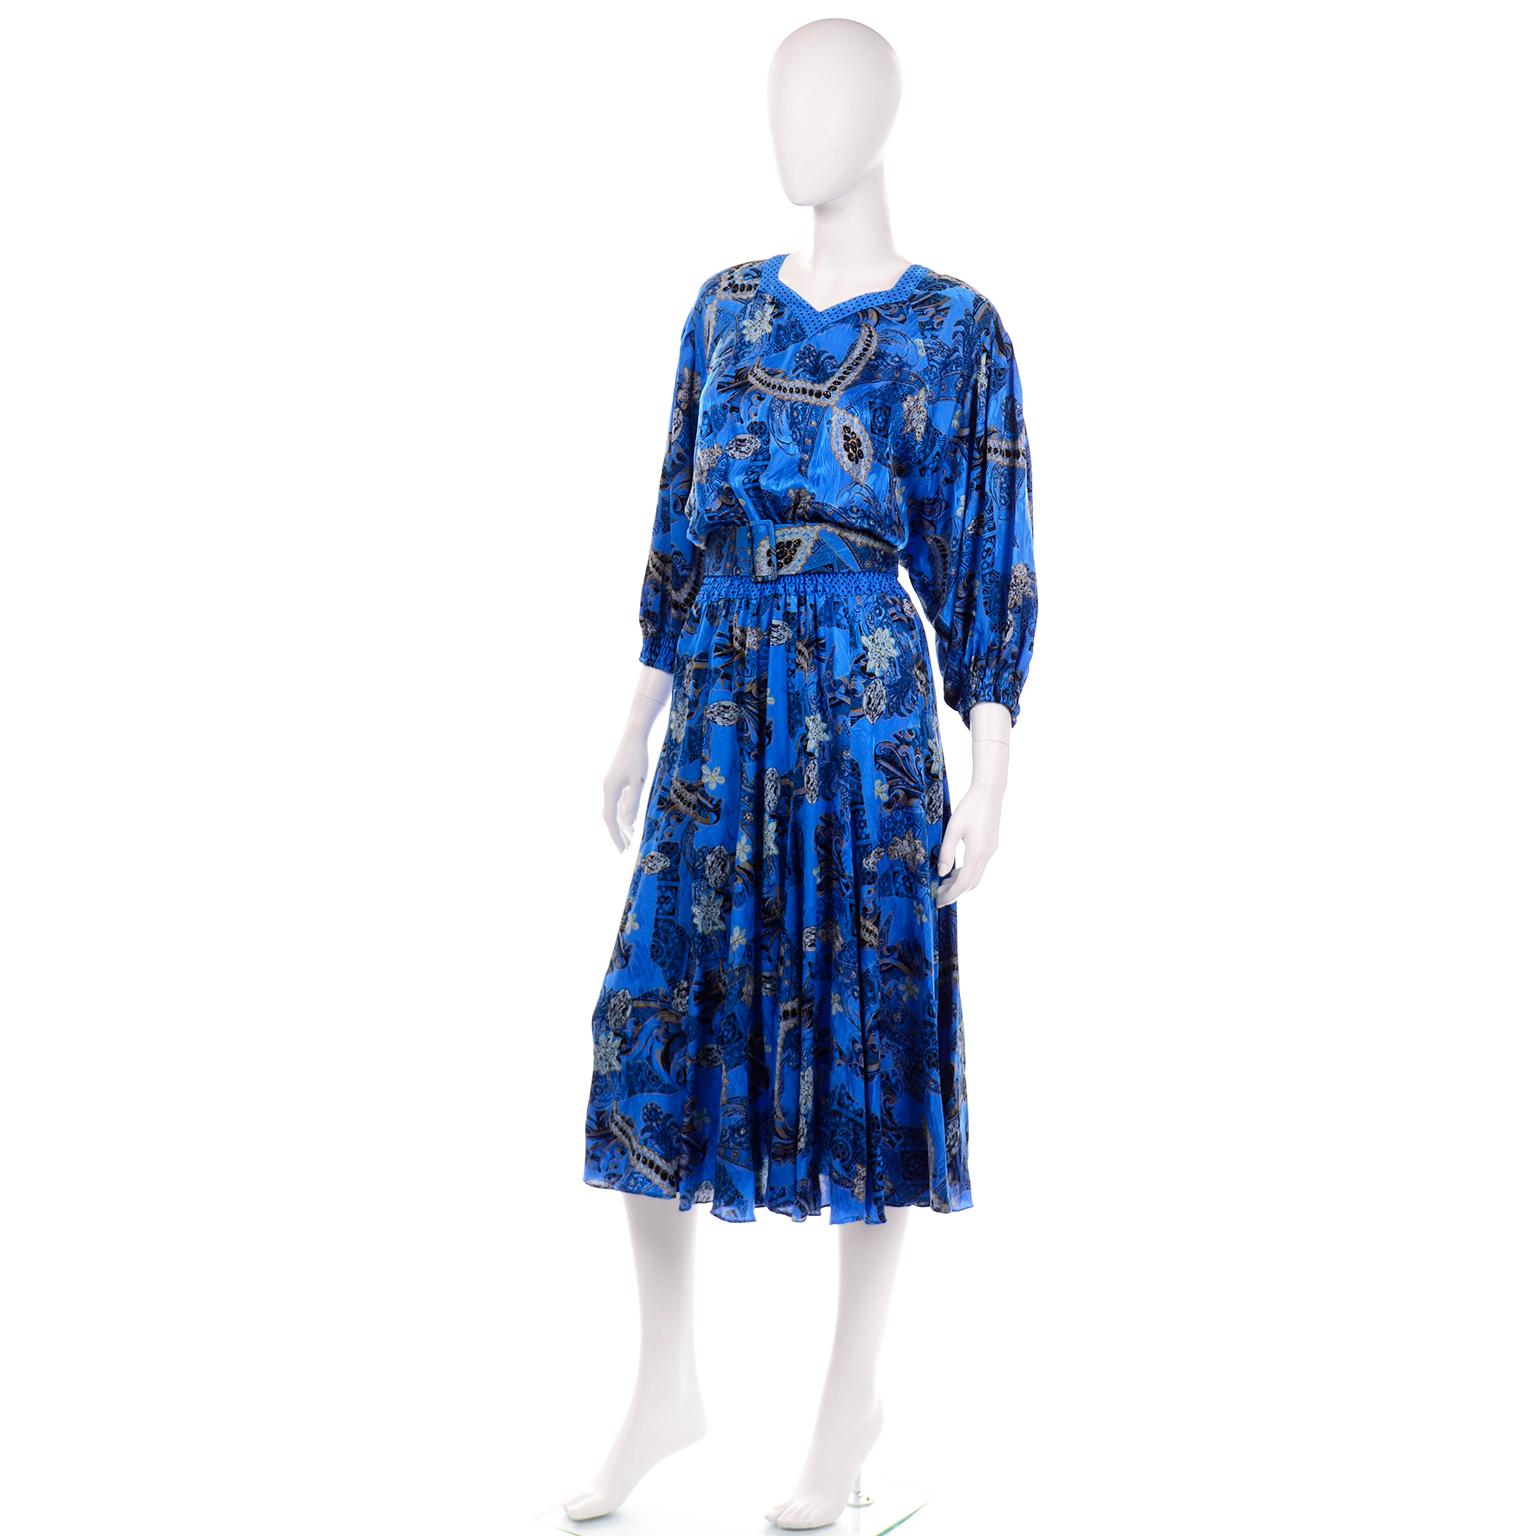 We acquired this 1980's Diane Freis vintage dress from the estate of a woman who had a huge Diane Freis collection. This dress is in a beautiful paisley print silk in a vibrant blue with some mustard, sky blue, and black details. The neckline is a